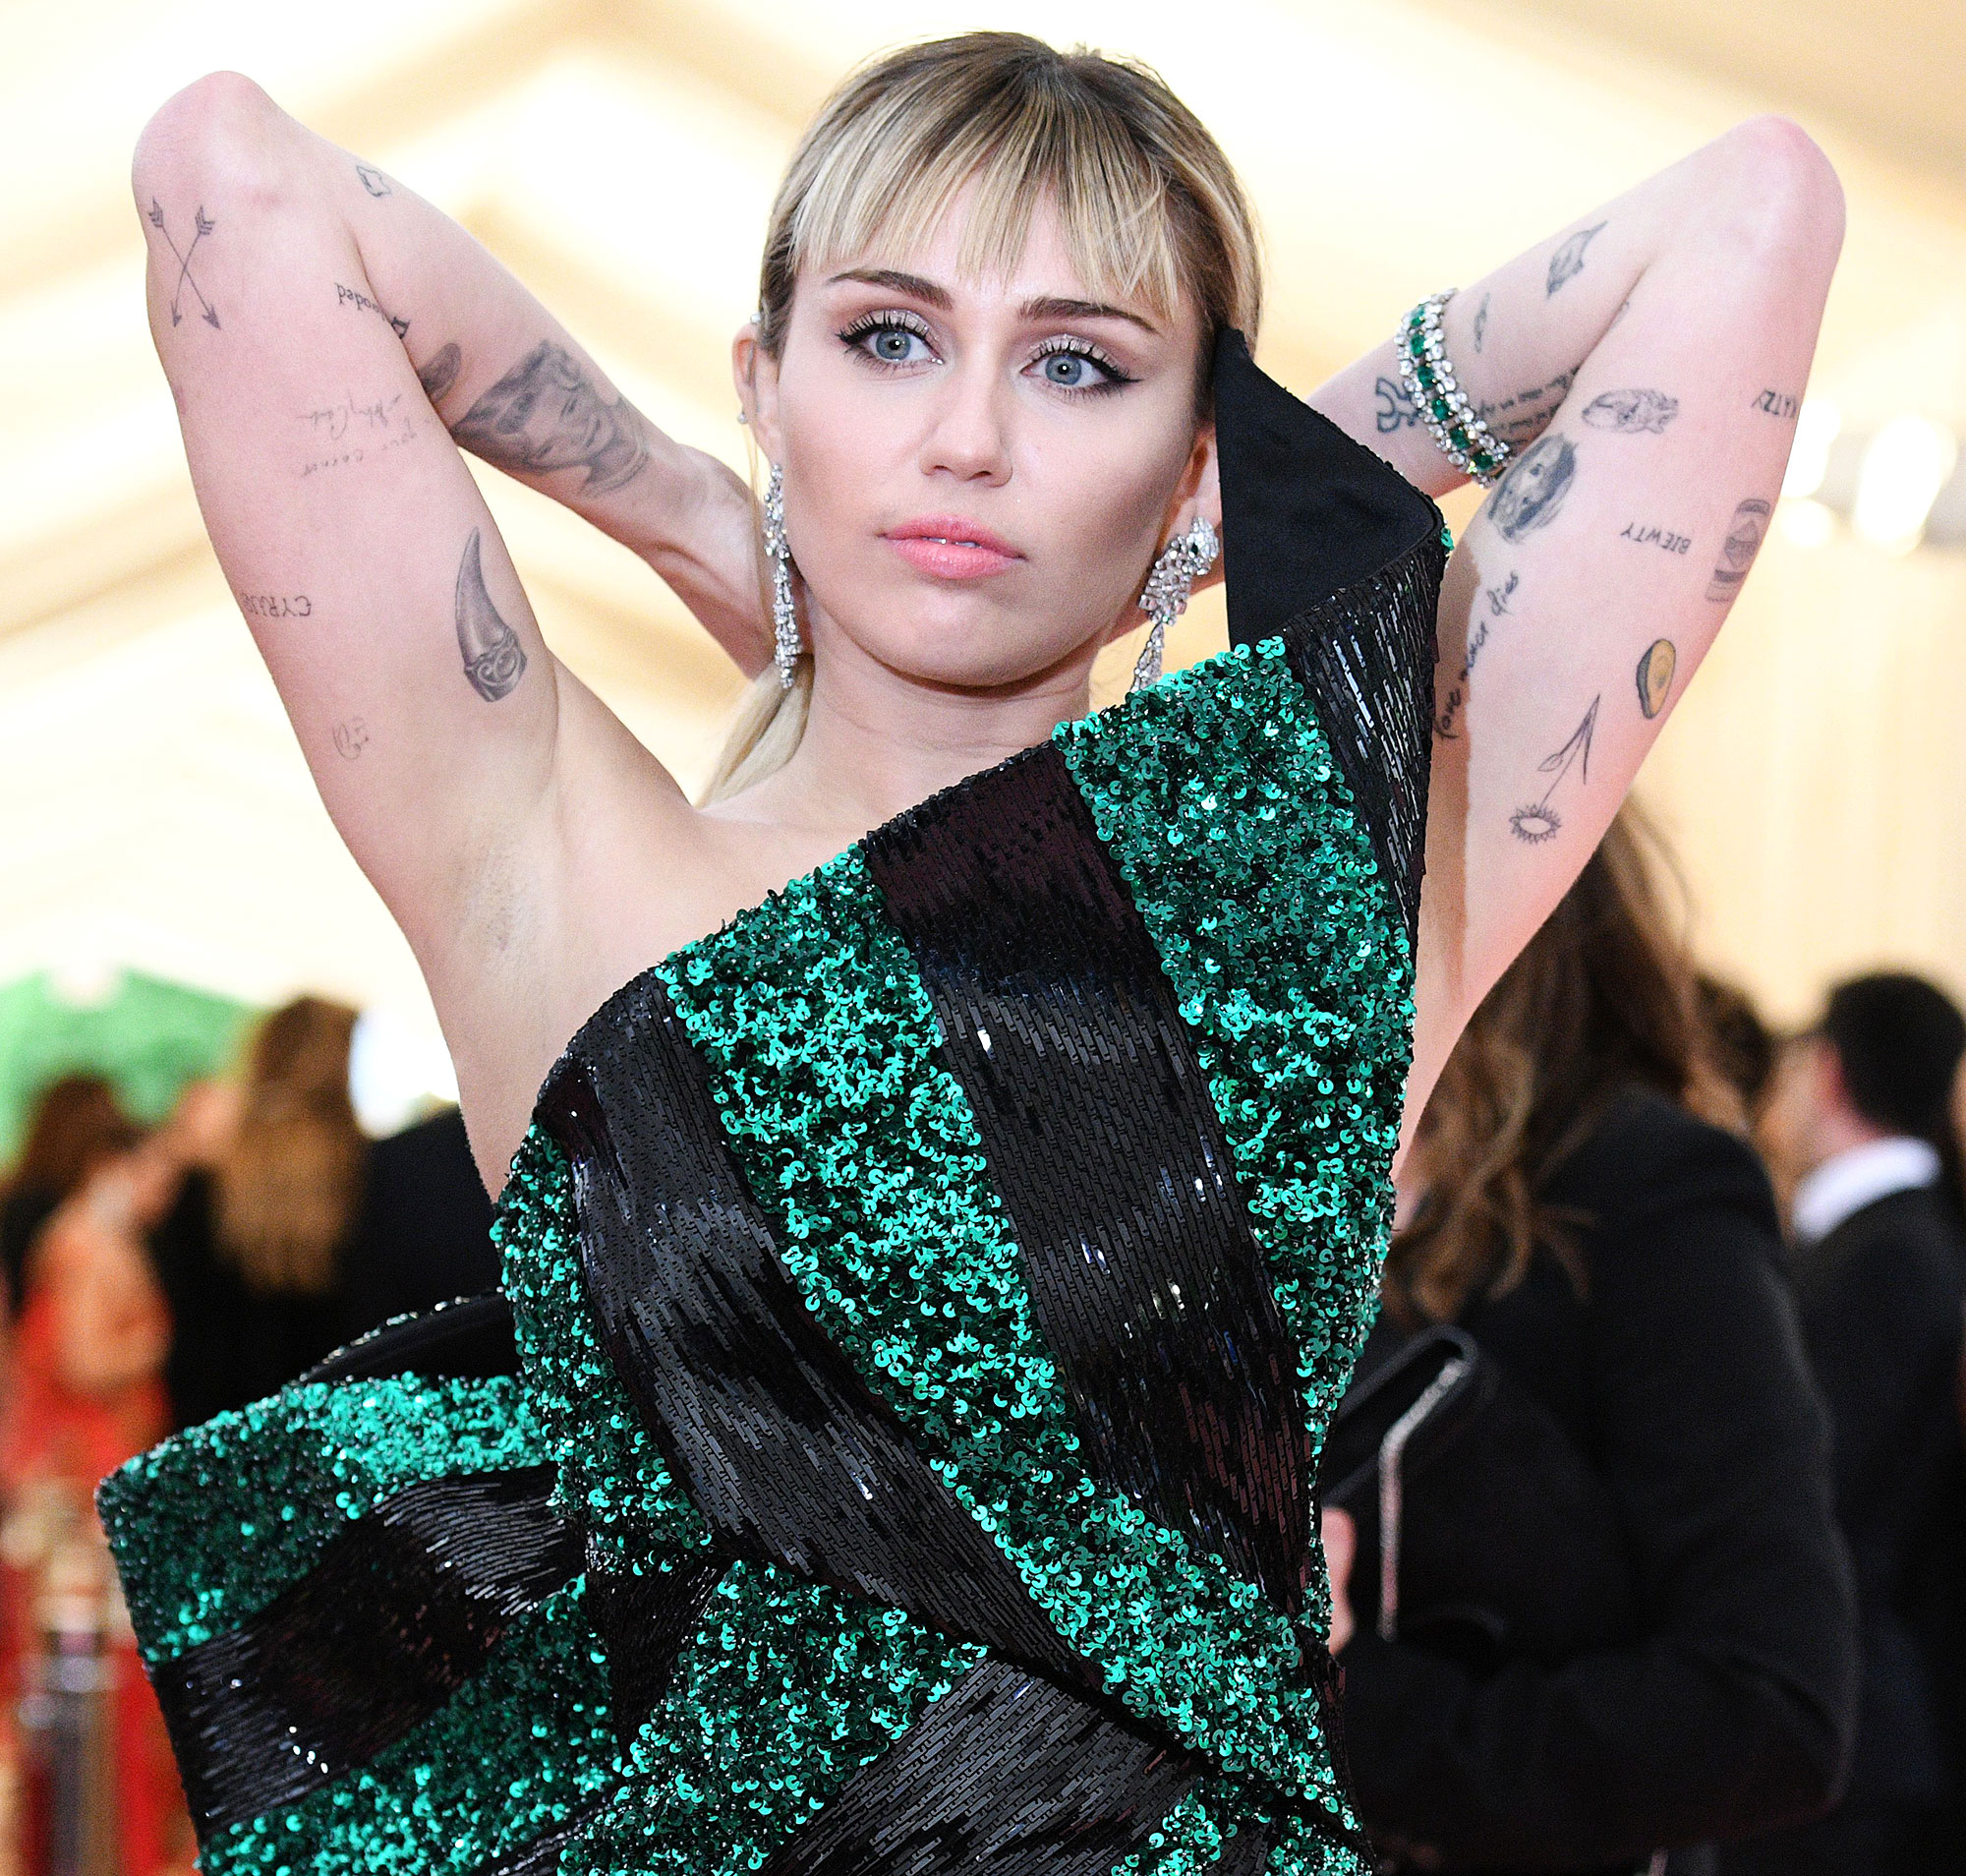 A Look at Miley Cyruss Tattoos And How Removal Would Look  Removery